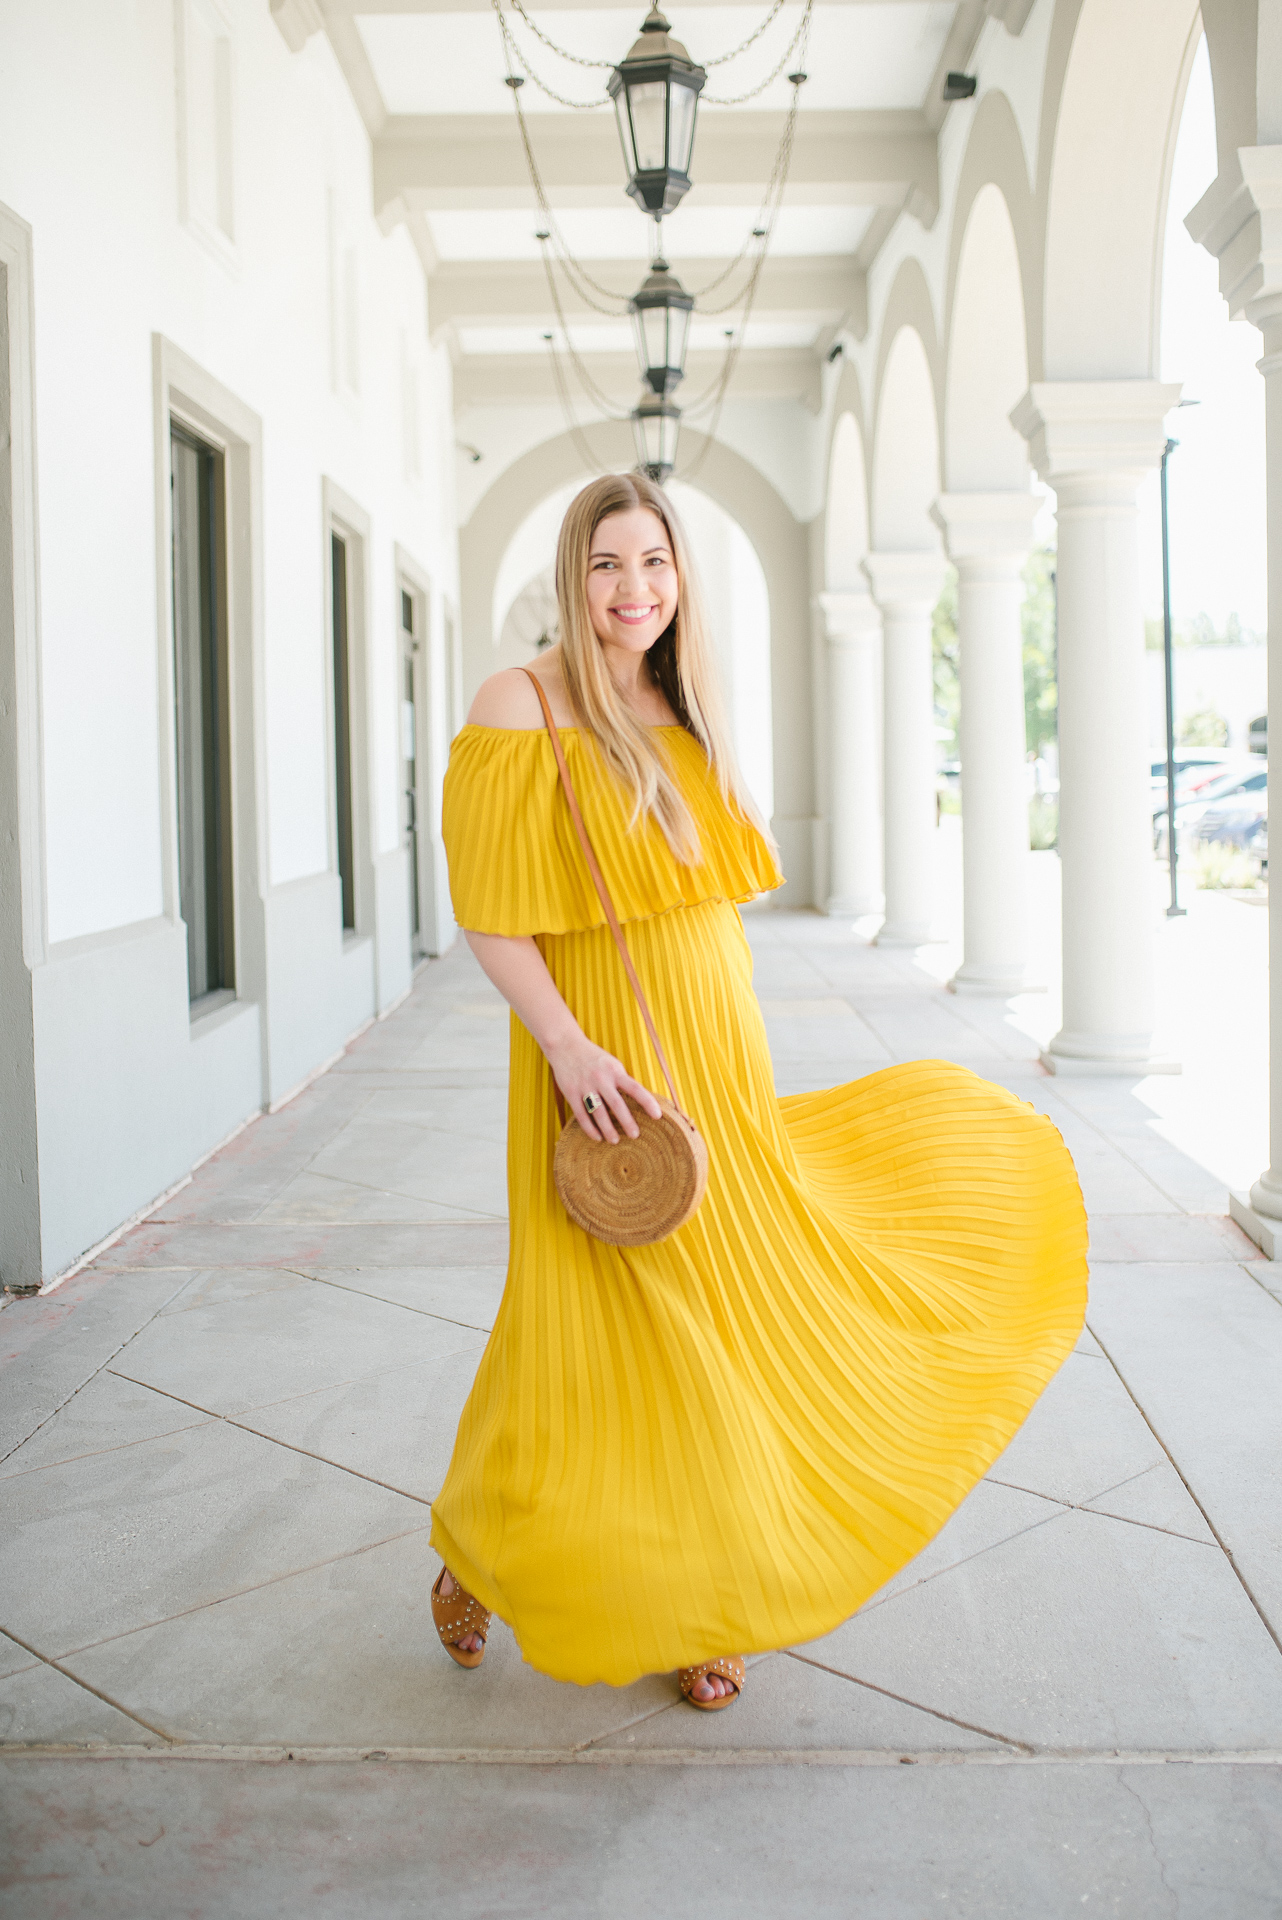 8 Amazing Dresses for Summer Travel - Yellow Pleated Maxi Dress worn by Cup of Charisma Jillian Goltzman Houston Fashion Blogger 1